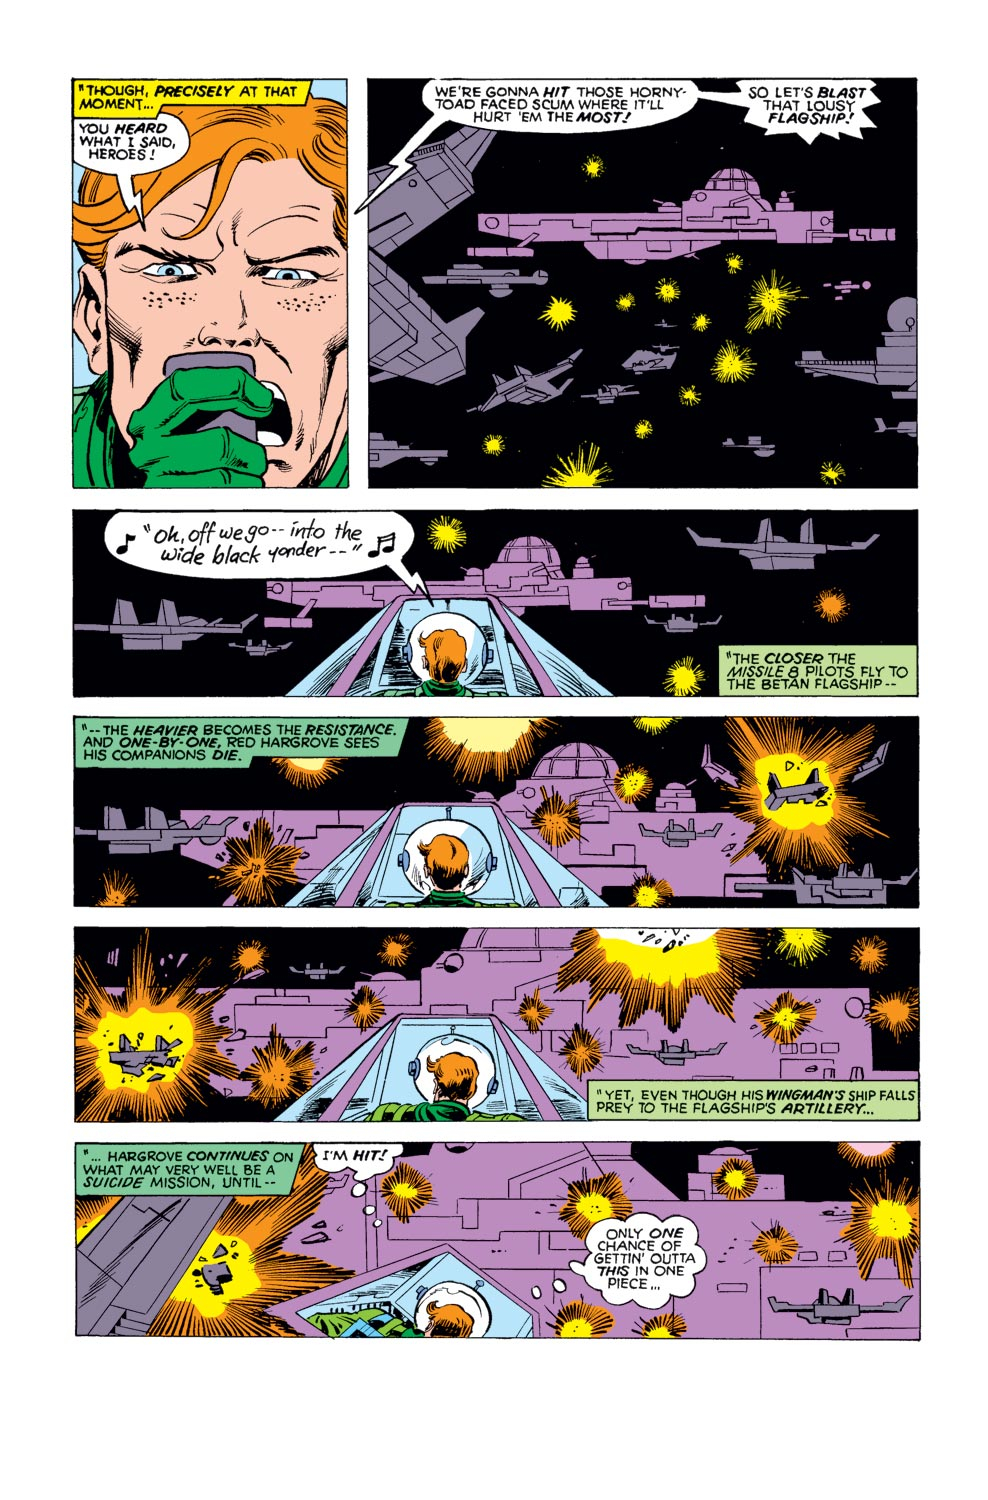 What If? (1977) issue 14 - Sgt. Fury had Fought WWII in Outer Space - Page 27